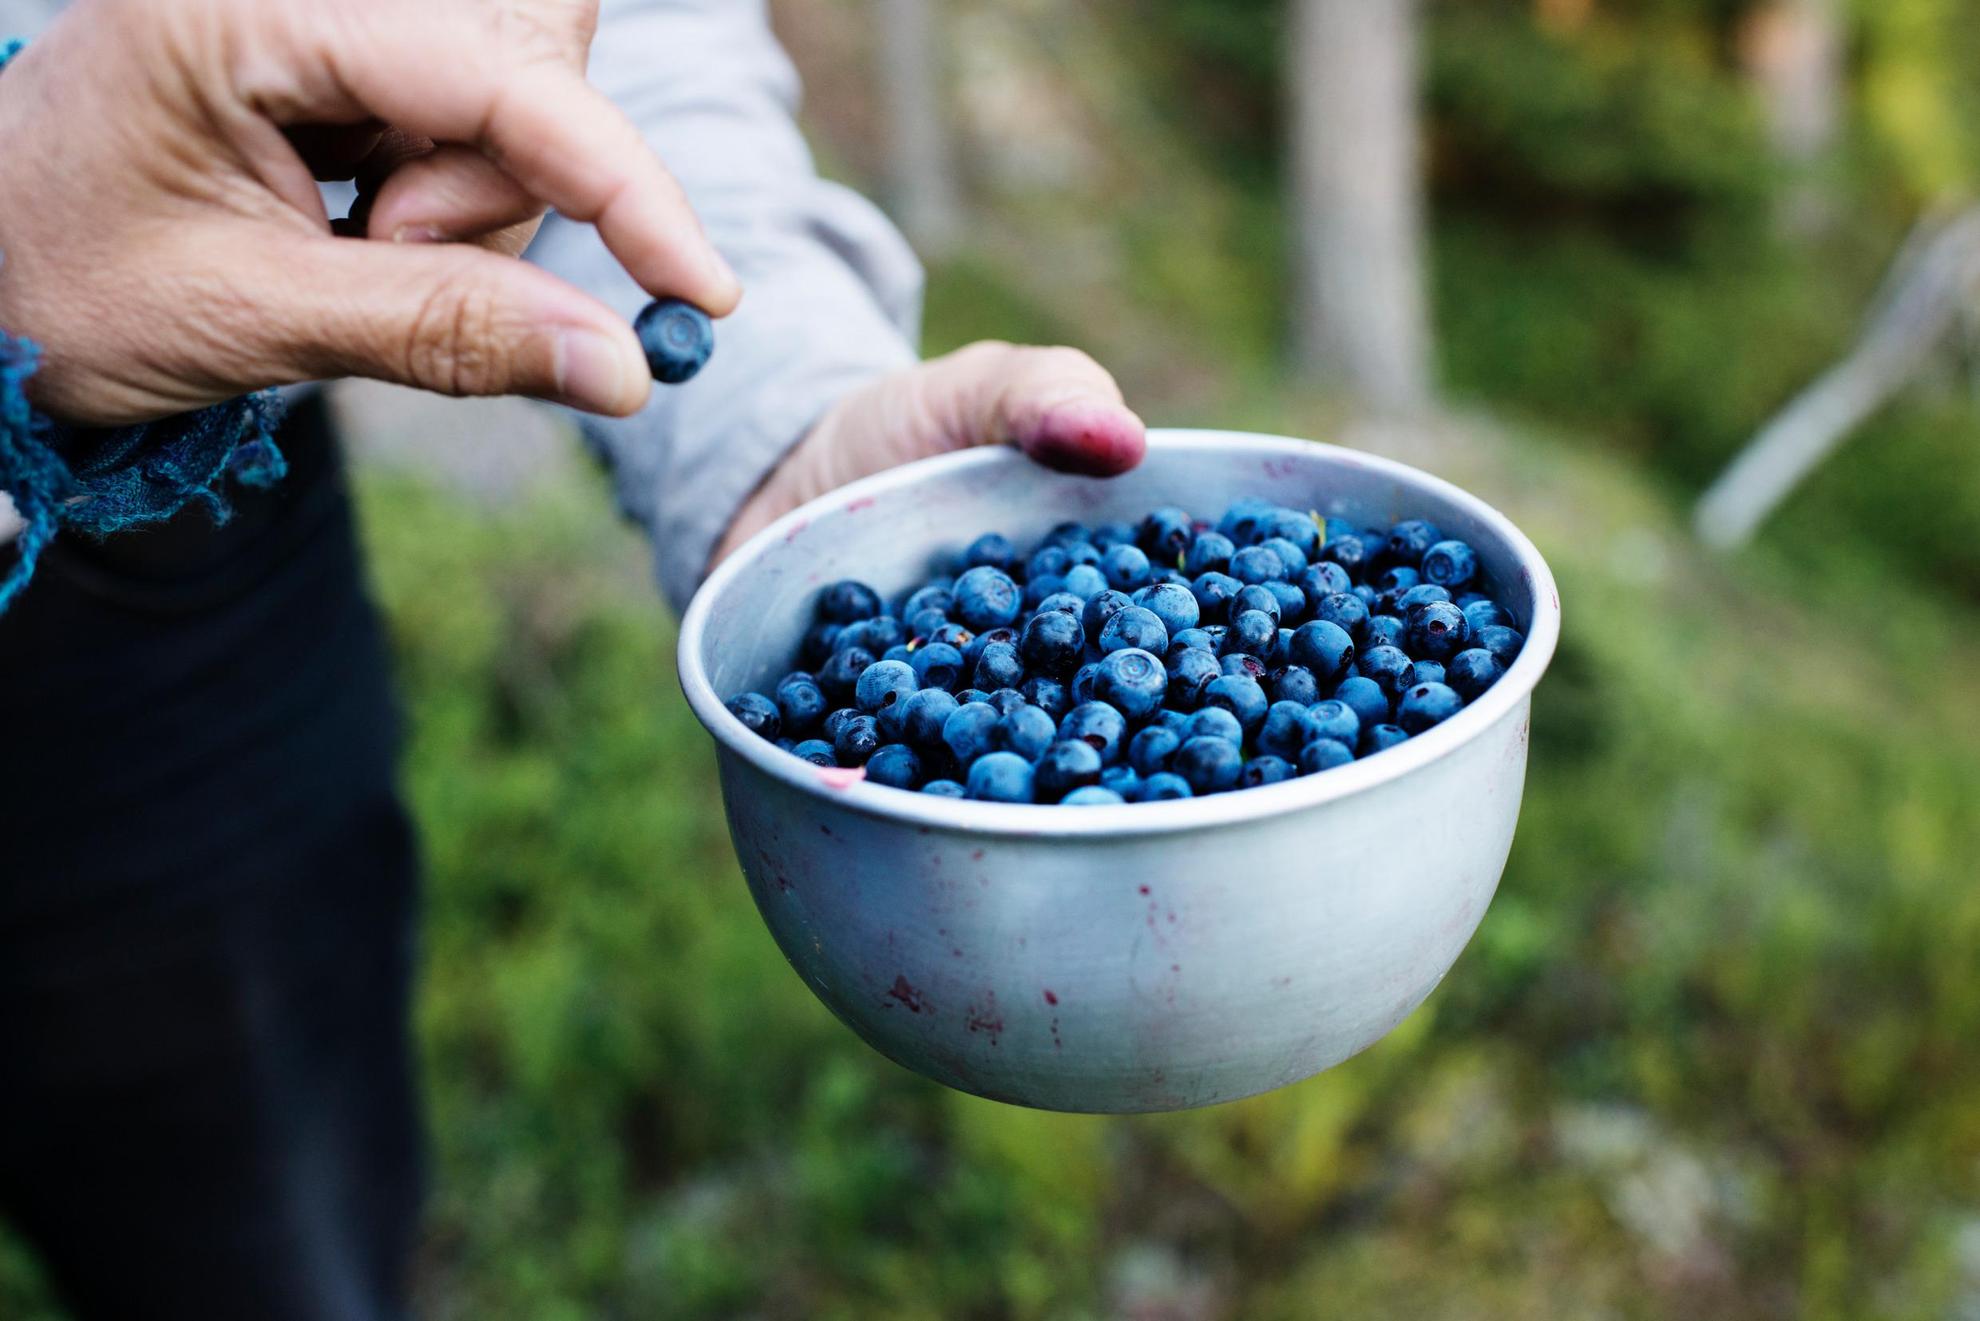 A person out of view is holding a bowl of blueberries in one hand and pinches one blueberry between two fingers of the other hand as if to show it to someone.